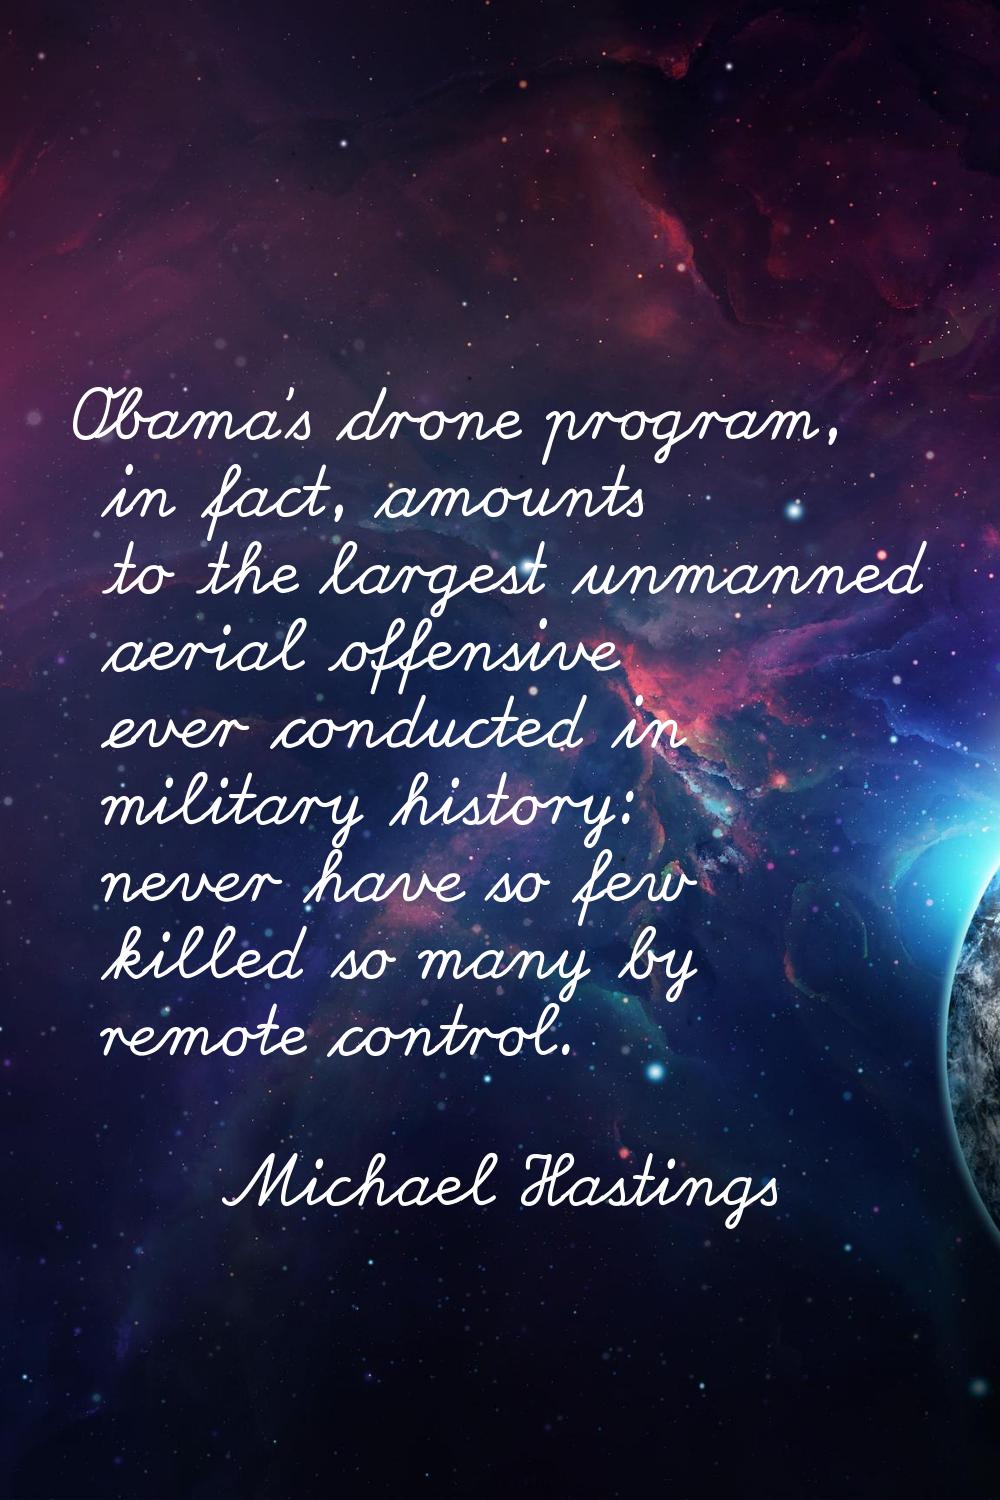 Obama's drone program, in fact, amounts to the largest unmanned aerial offensive ever conducted in 